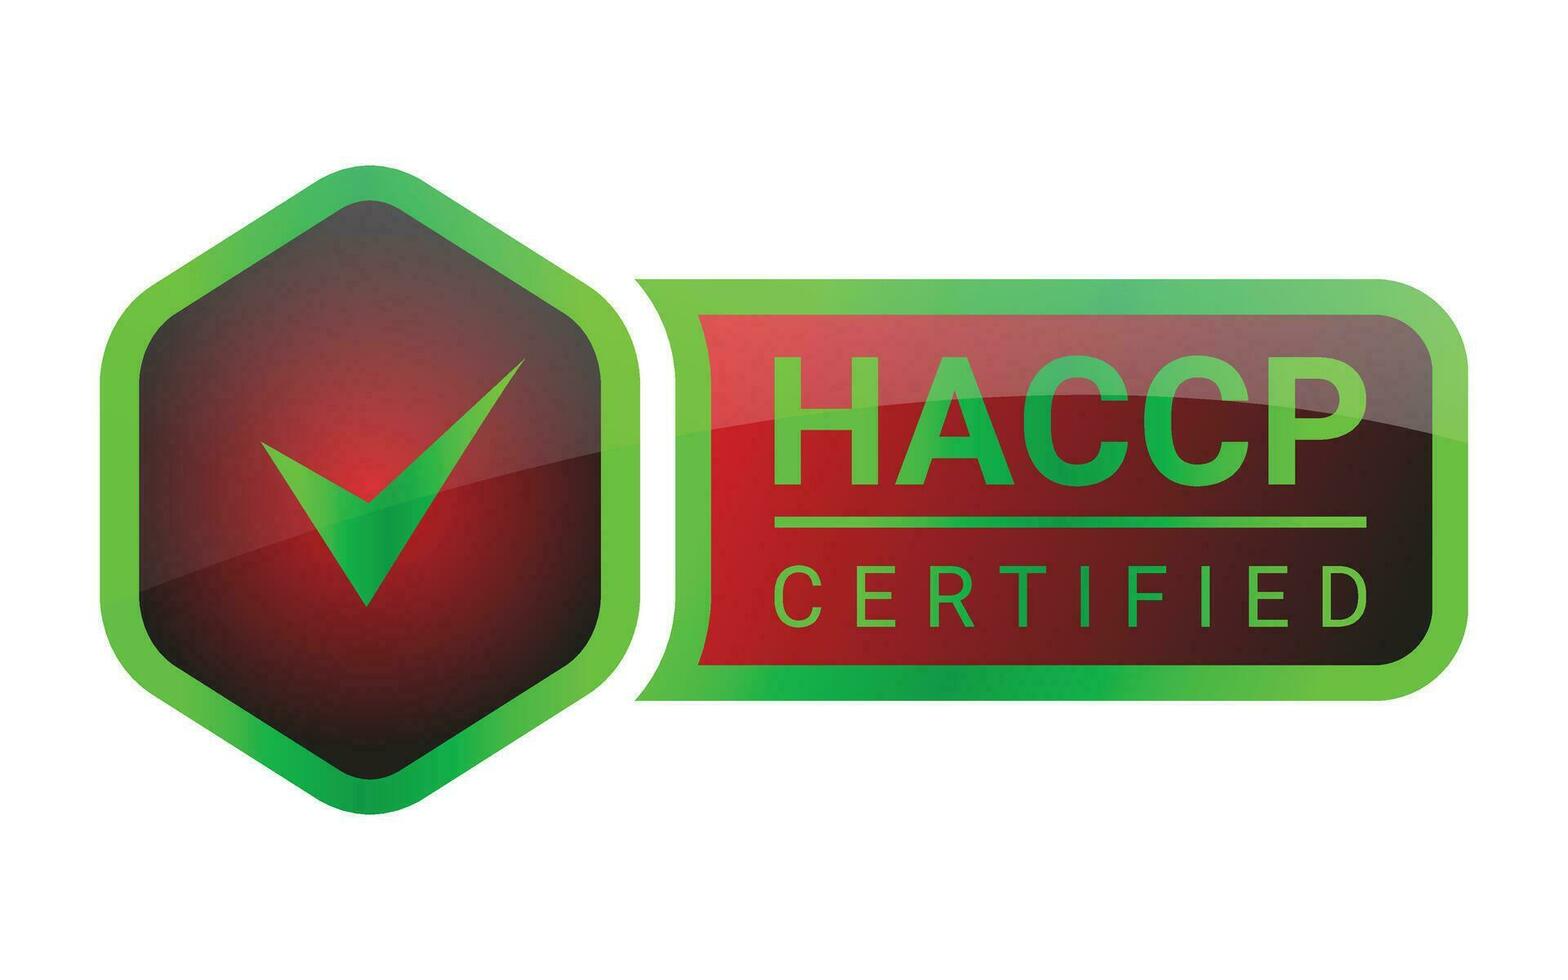 Hazard Analysis Critical Control Point Or HACCP Certified Badge, Label, Stamp, Rubber, Food And Drug Administration Approved, Health And Medicine Related Design, Product Label Vector Illustration